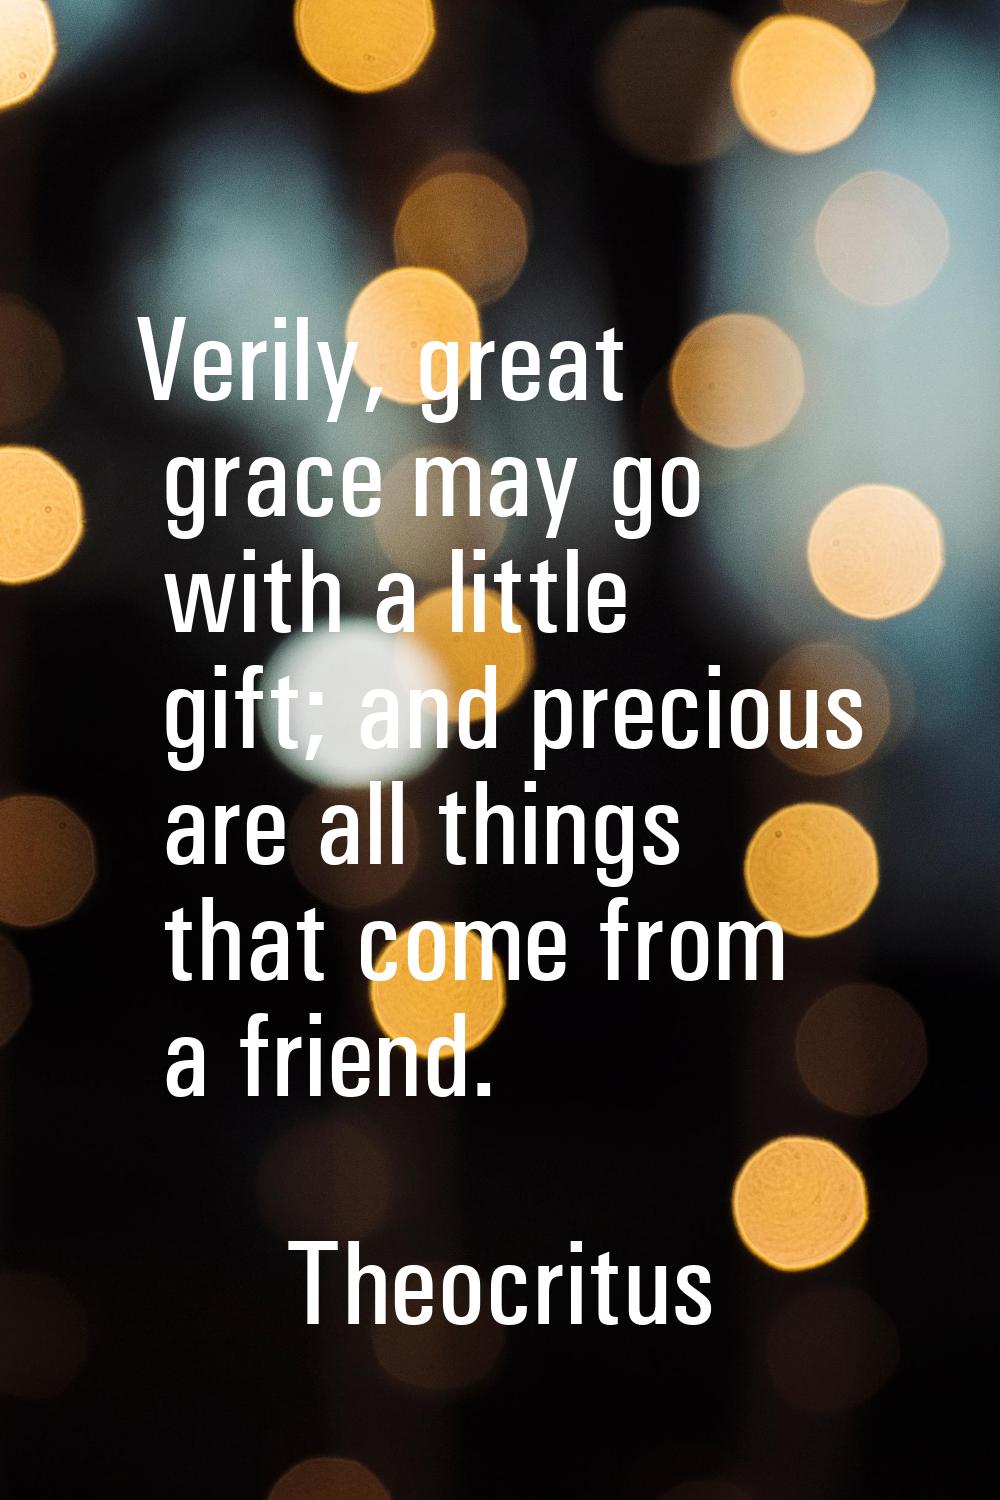 Verily, great grace may go with a little gift; and precious are all things that come from a friend.